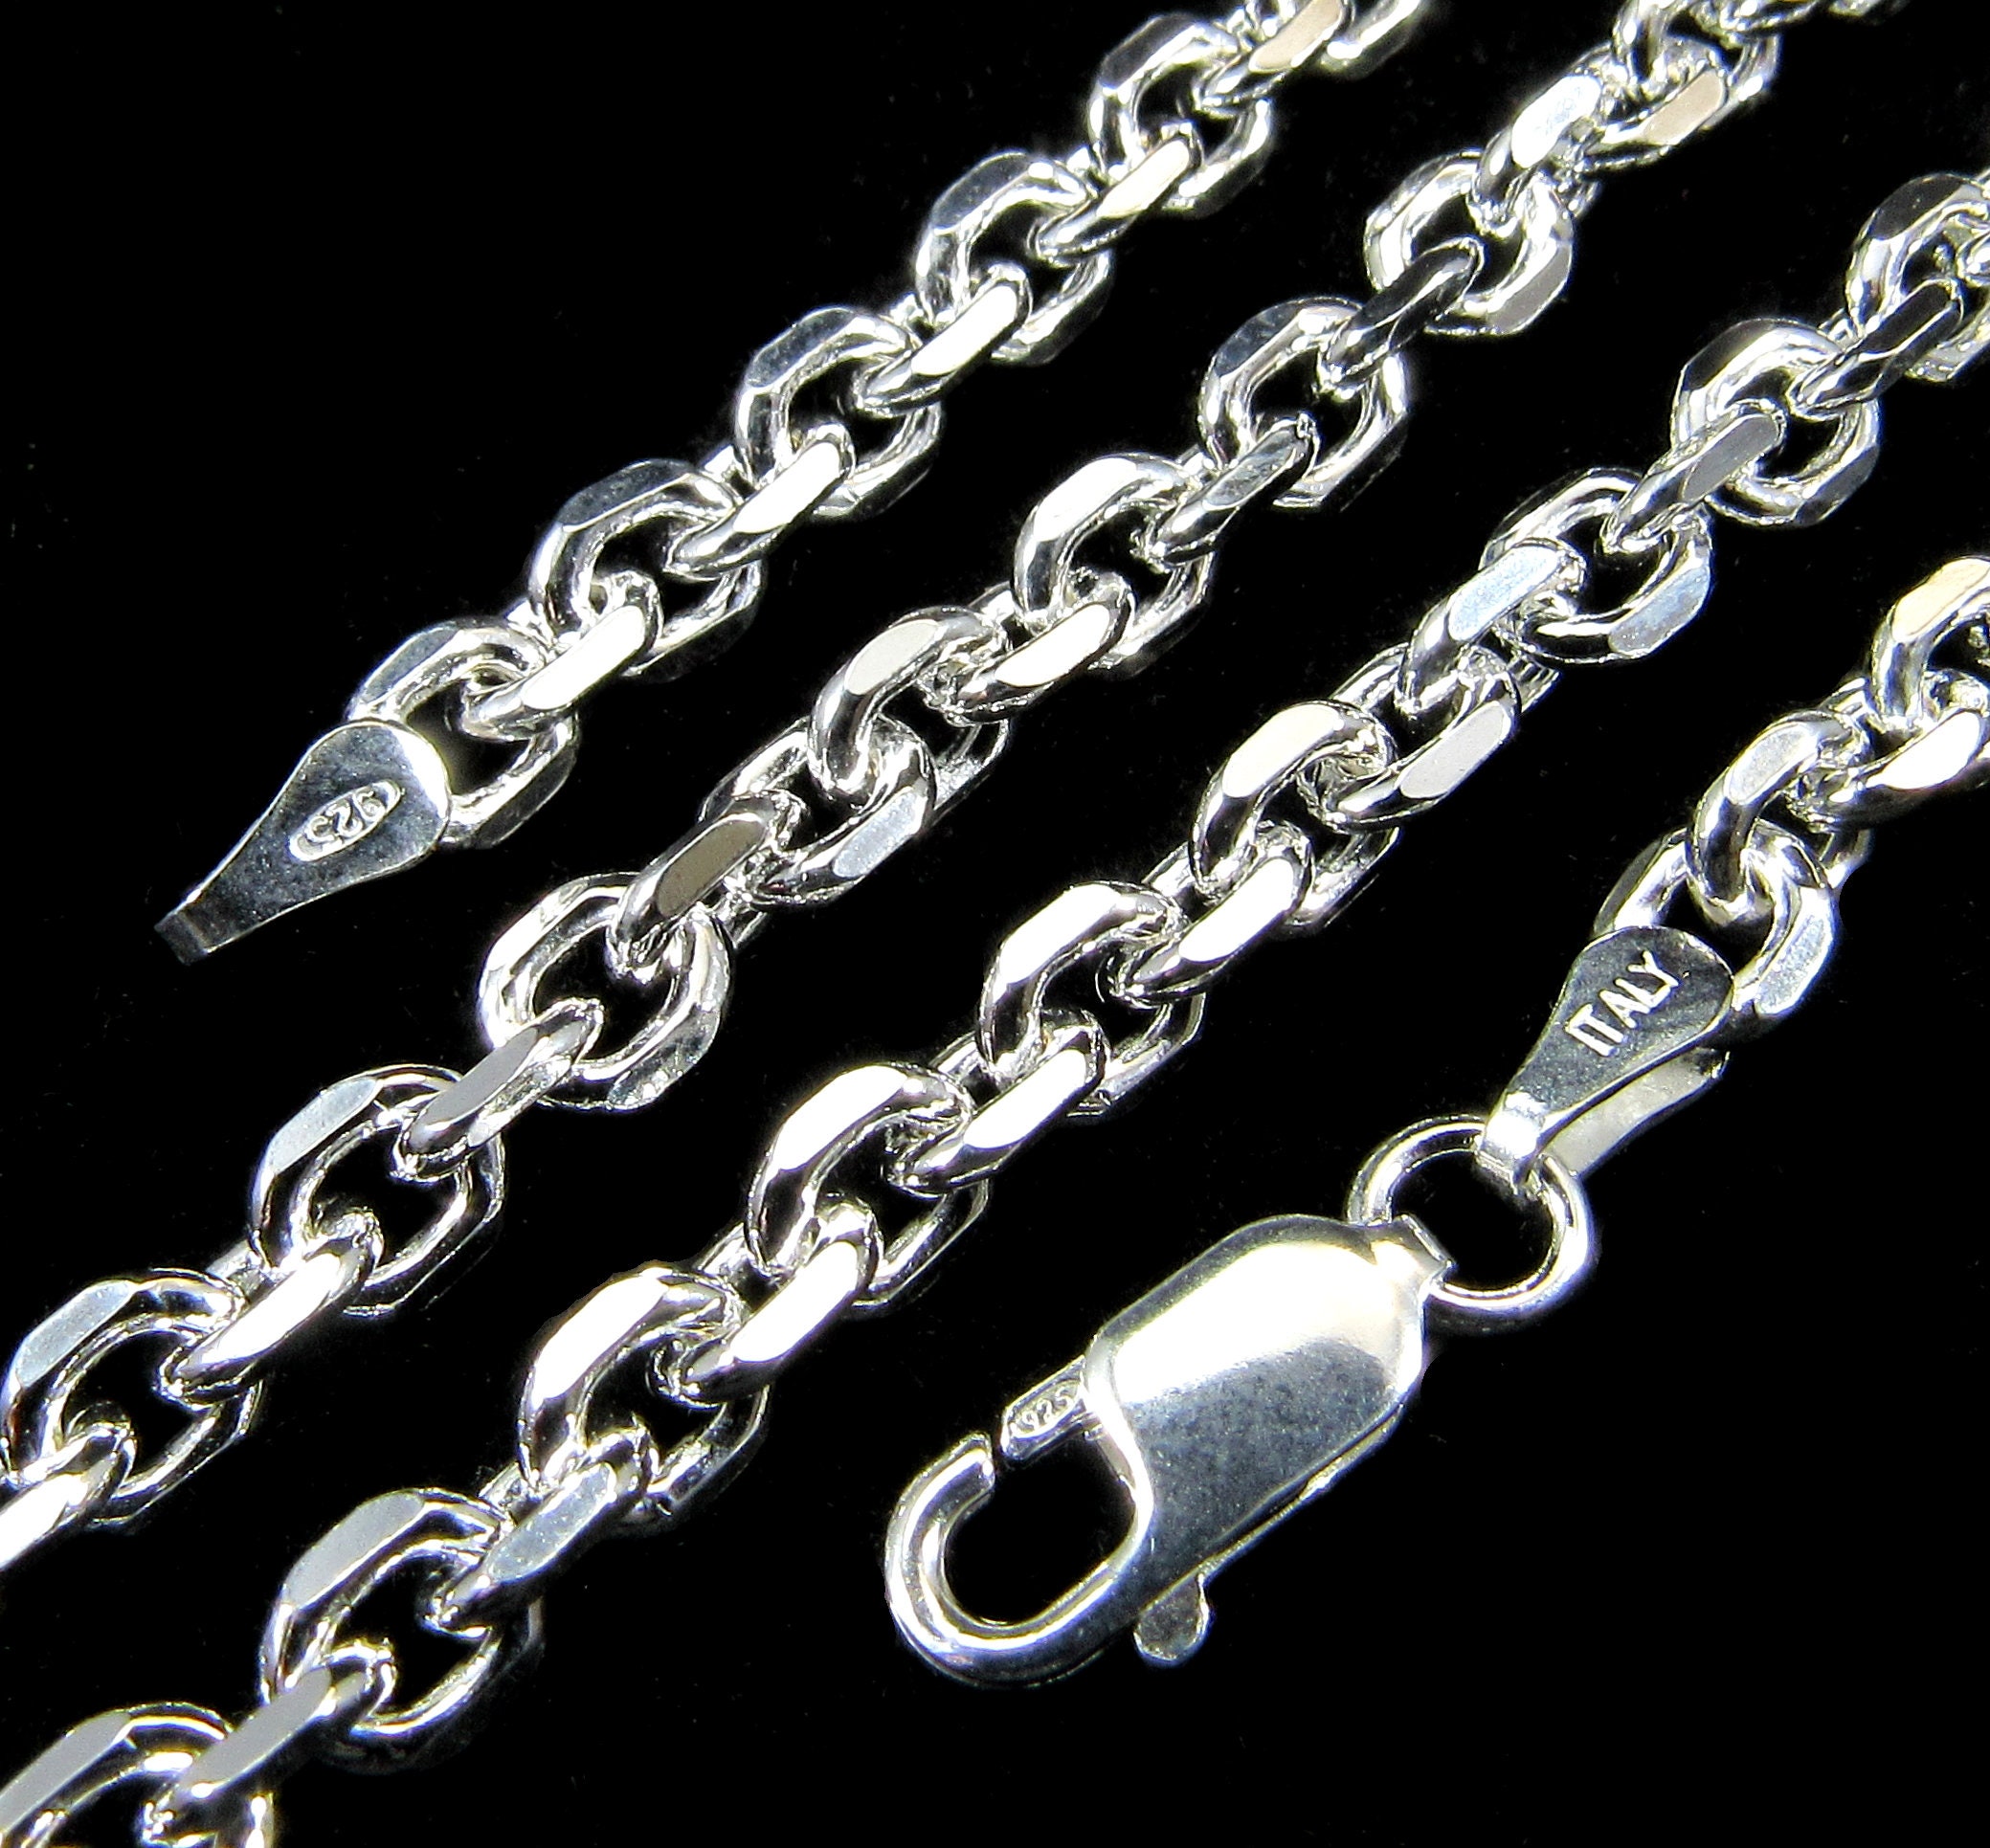 4MM Solid 925 Sterling Silver Italian Anchor Link Cable Chain, Bracelet or  Necklace Made in Italy 7 8 16 18 20 22 24 26 28 or 30